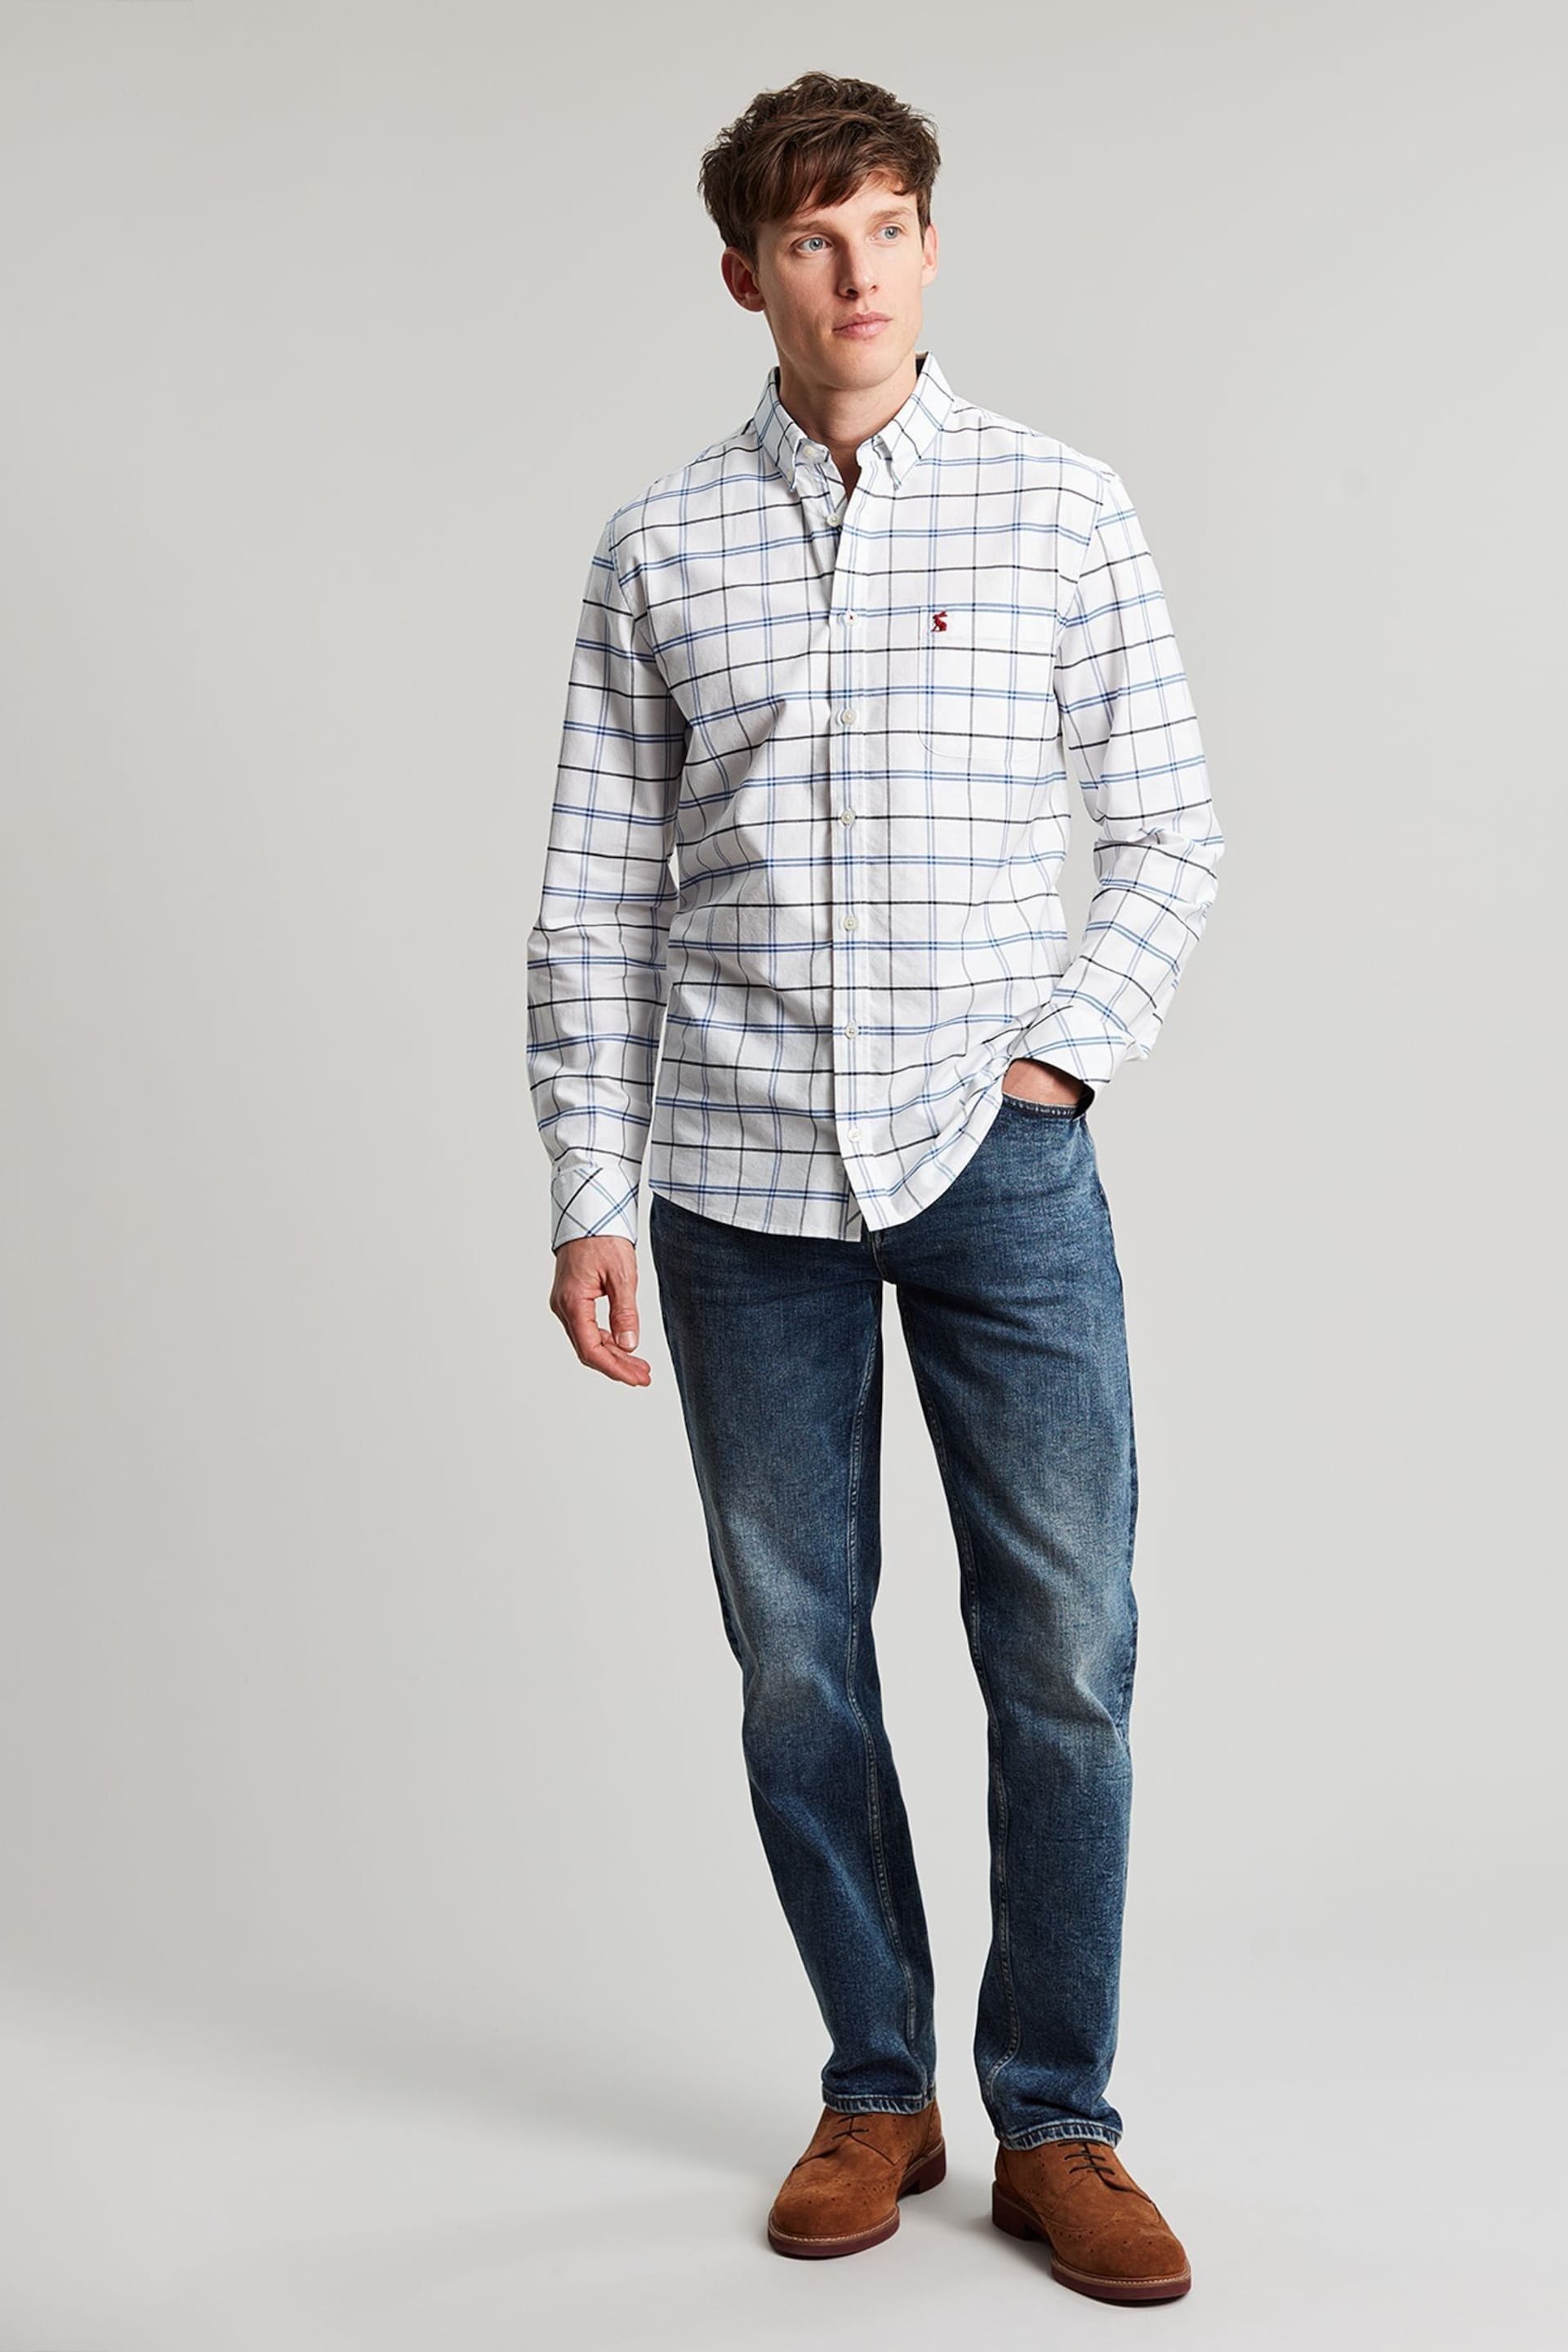 Joules Welford White/Blue Cotton Check Shirt - Image 6 of 8